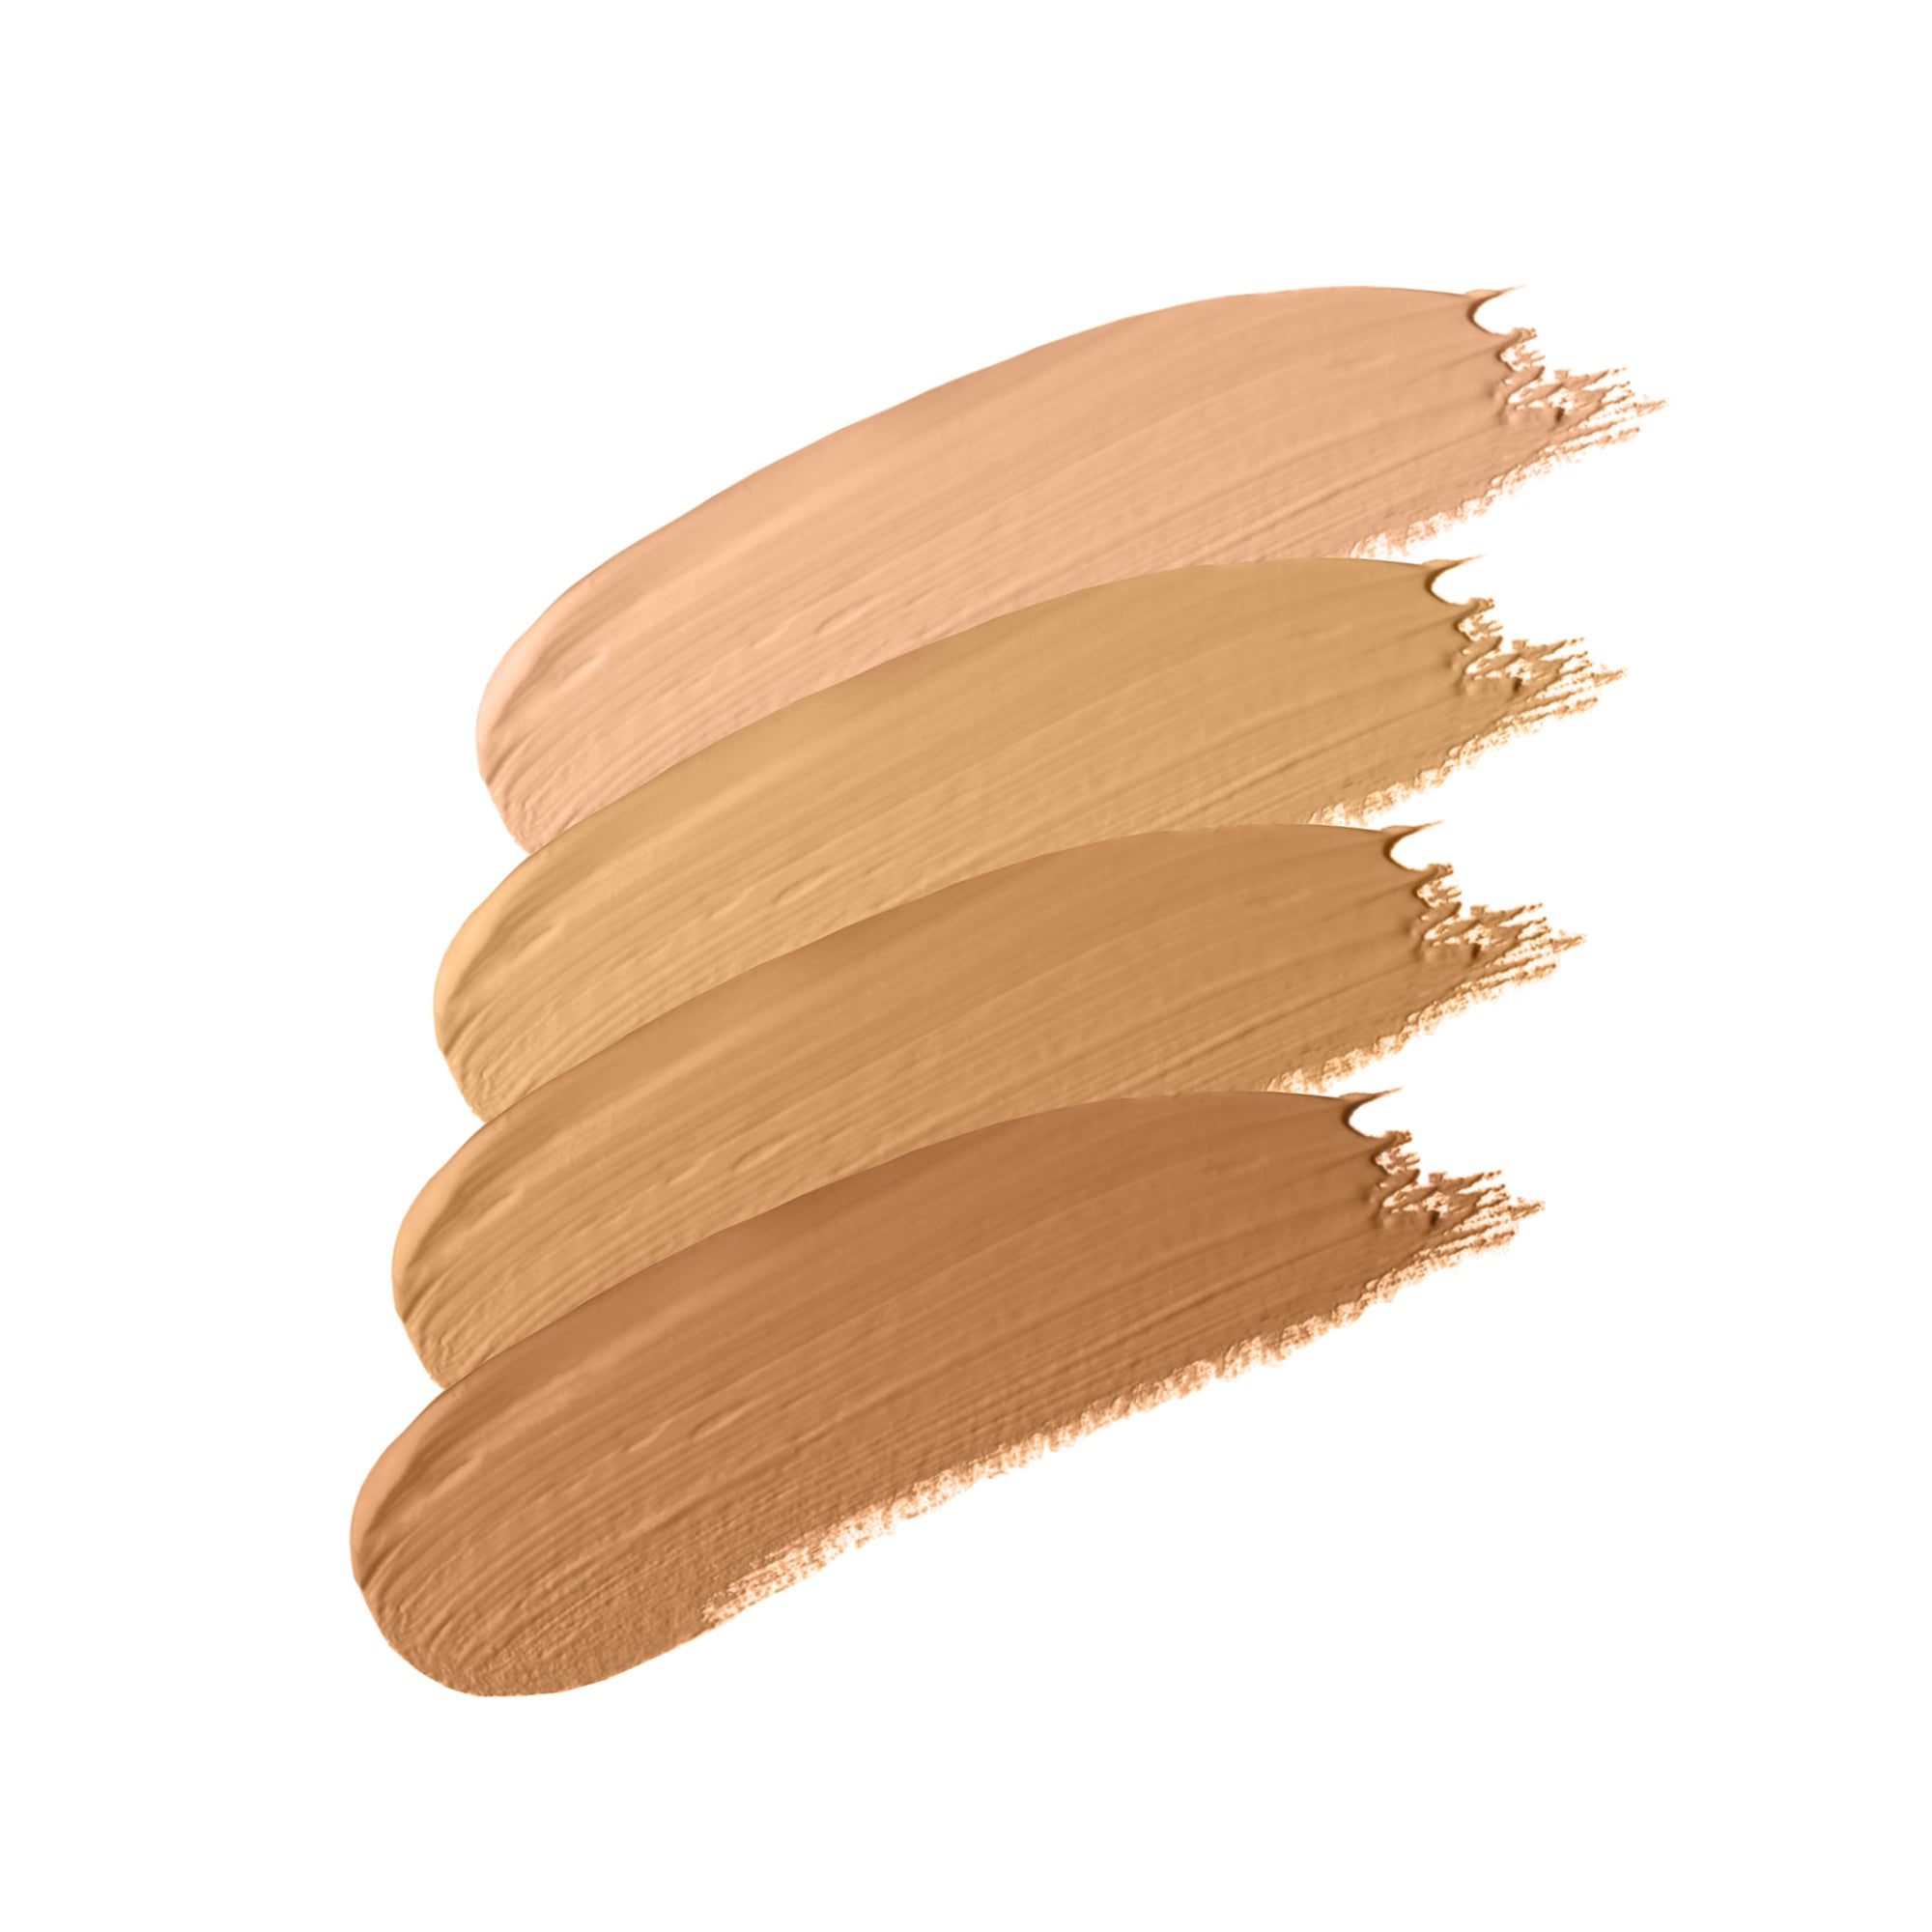 7 - BROWN - buildable, creamy, hydrating concealer in brown undertone shade seven in group shot